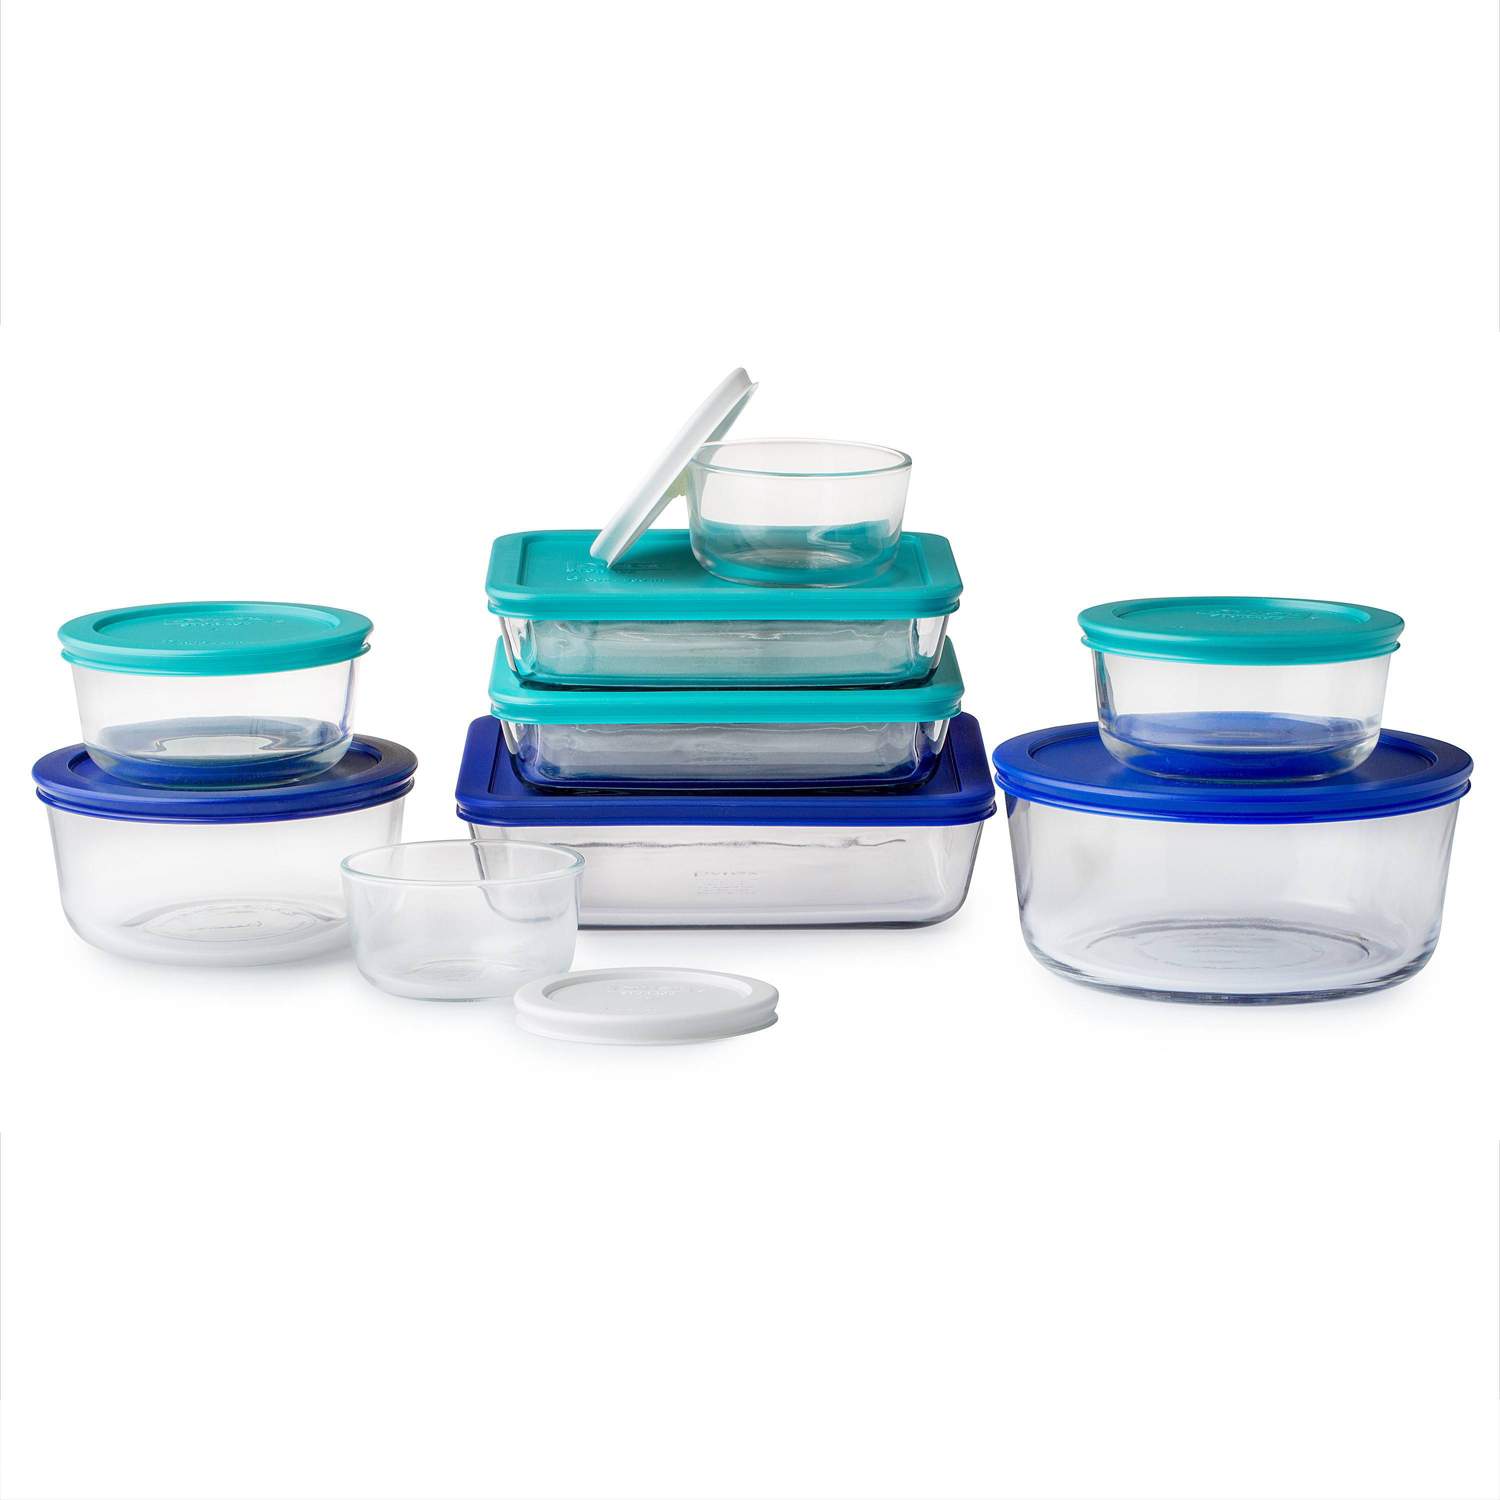 18-Piece Pyrex Glass Storage Set $23 + Free Store Pickup at Target or FS on $35+